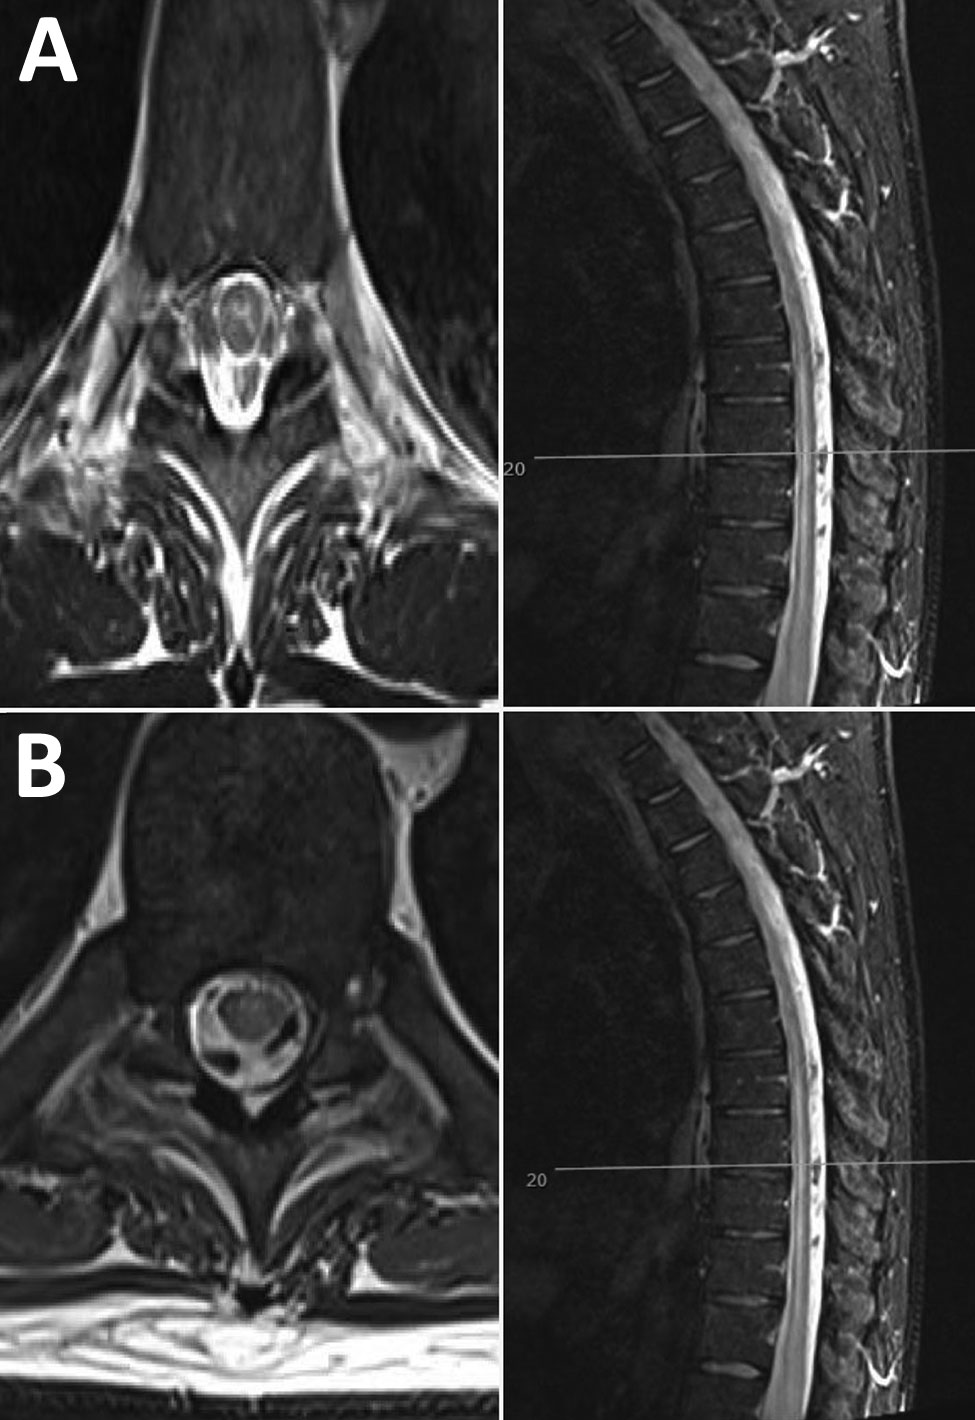 Neurologic manifestations of tick-borne encephalitis in a 38-year-old man from the United Kingdom after travel to Lithuania. A) Magnetic resonance imaging of the brain and spinal cord at onset of neurologic signs, showing possible longitudinal extensive transverse myelitis in the cervical and thoracic cord, with involvement of the central gray matter. B) One month later, increased T2 signal and mild swelling of the central gray matter of the cervical cord have both regressed, with some residual 